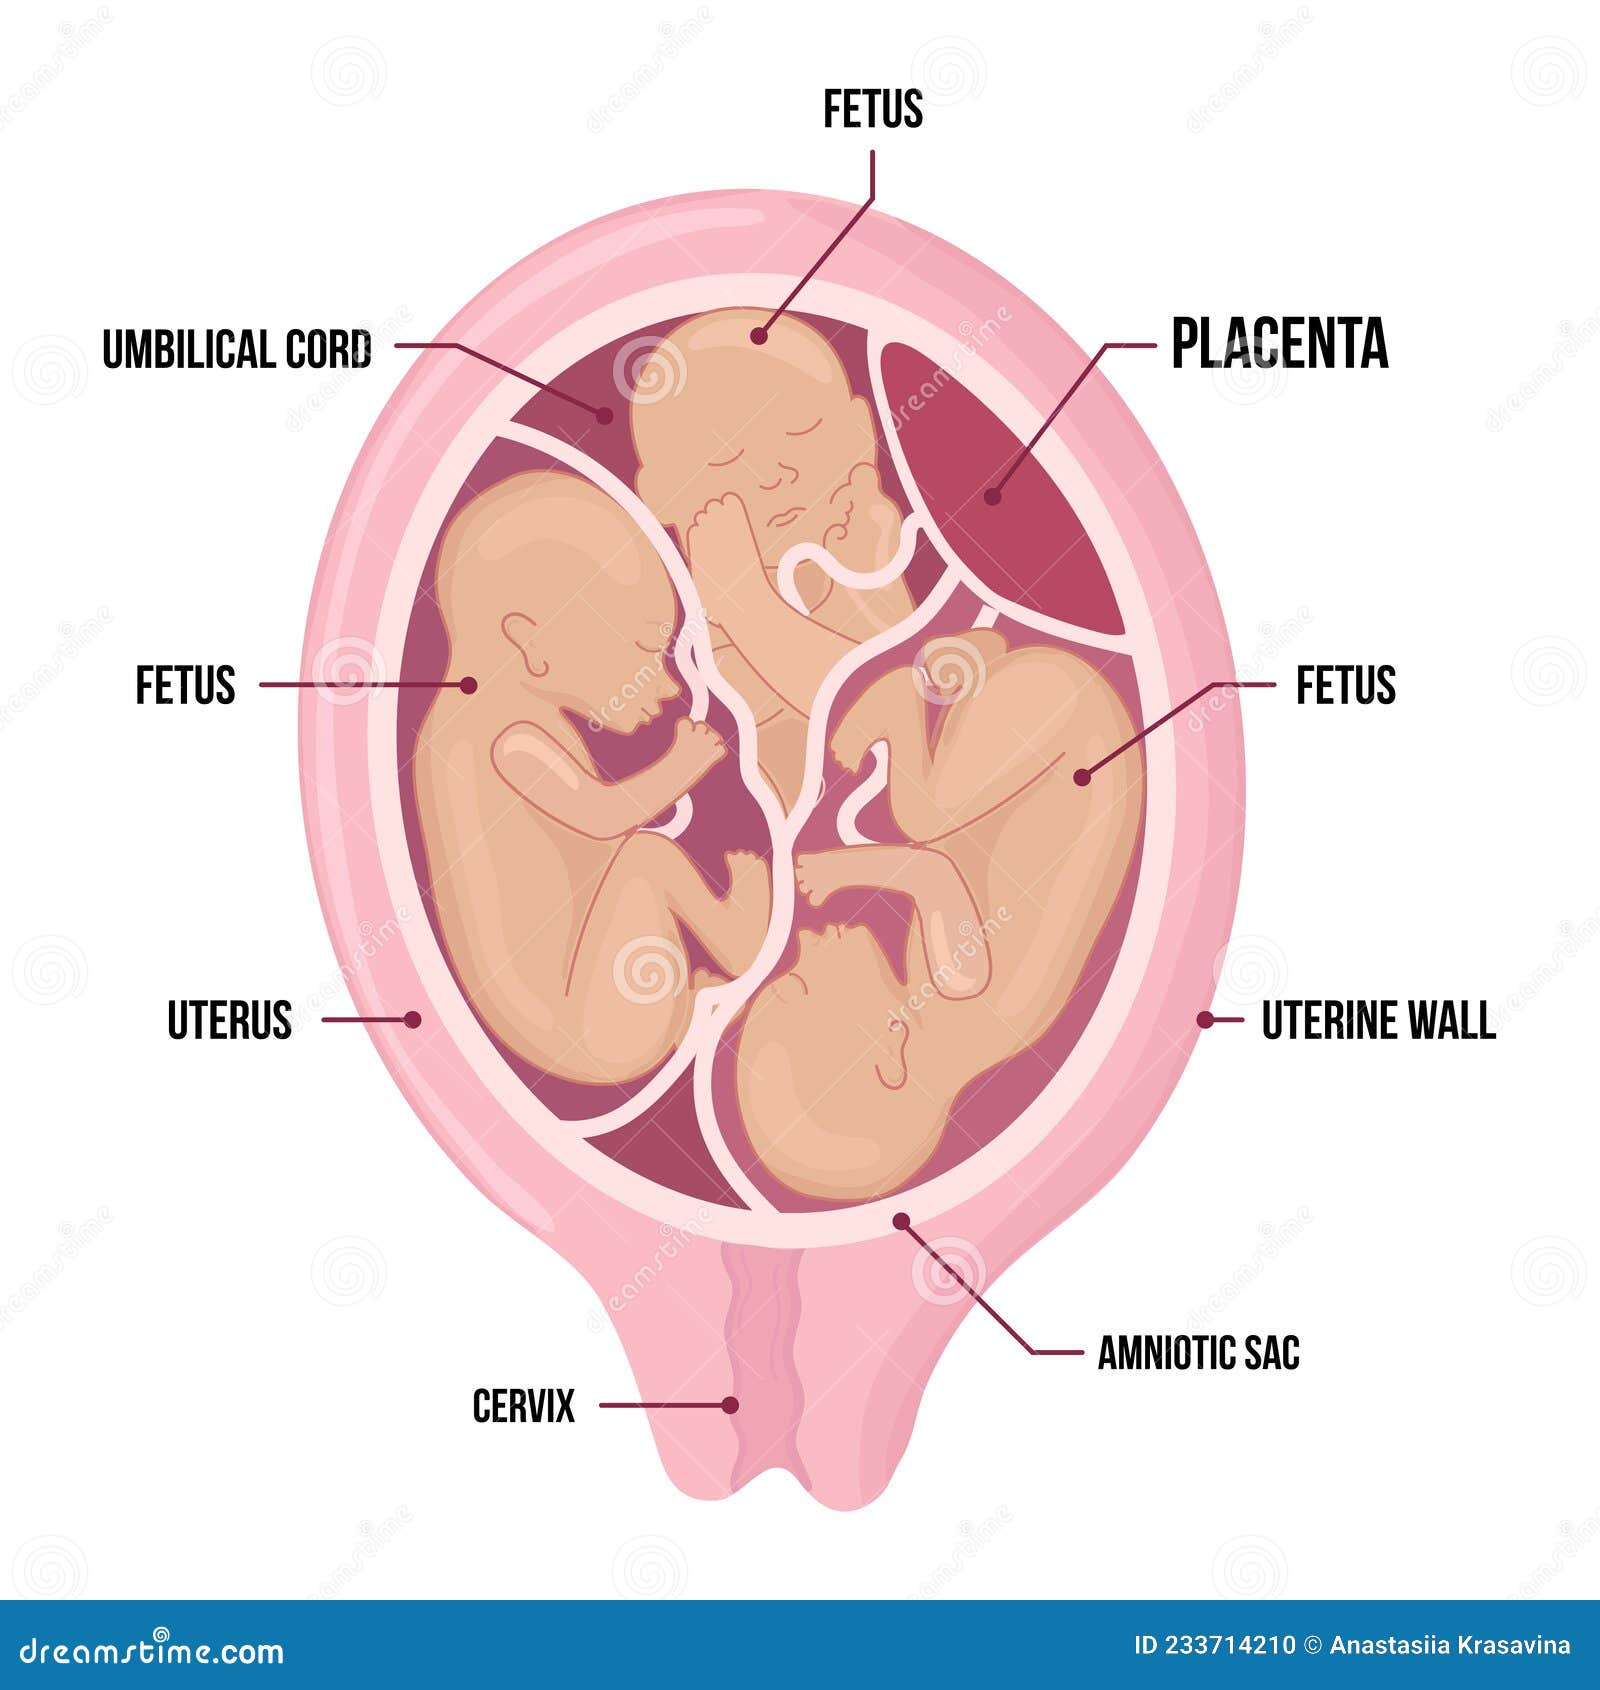 2 Amniotic Sack Images, Stock Photos, 3D objects, & Vectors | Shutterstock